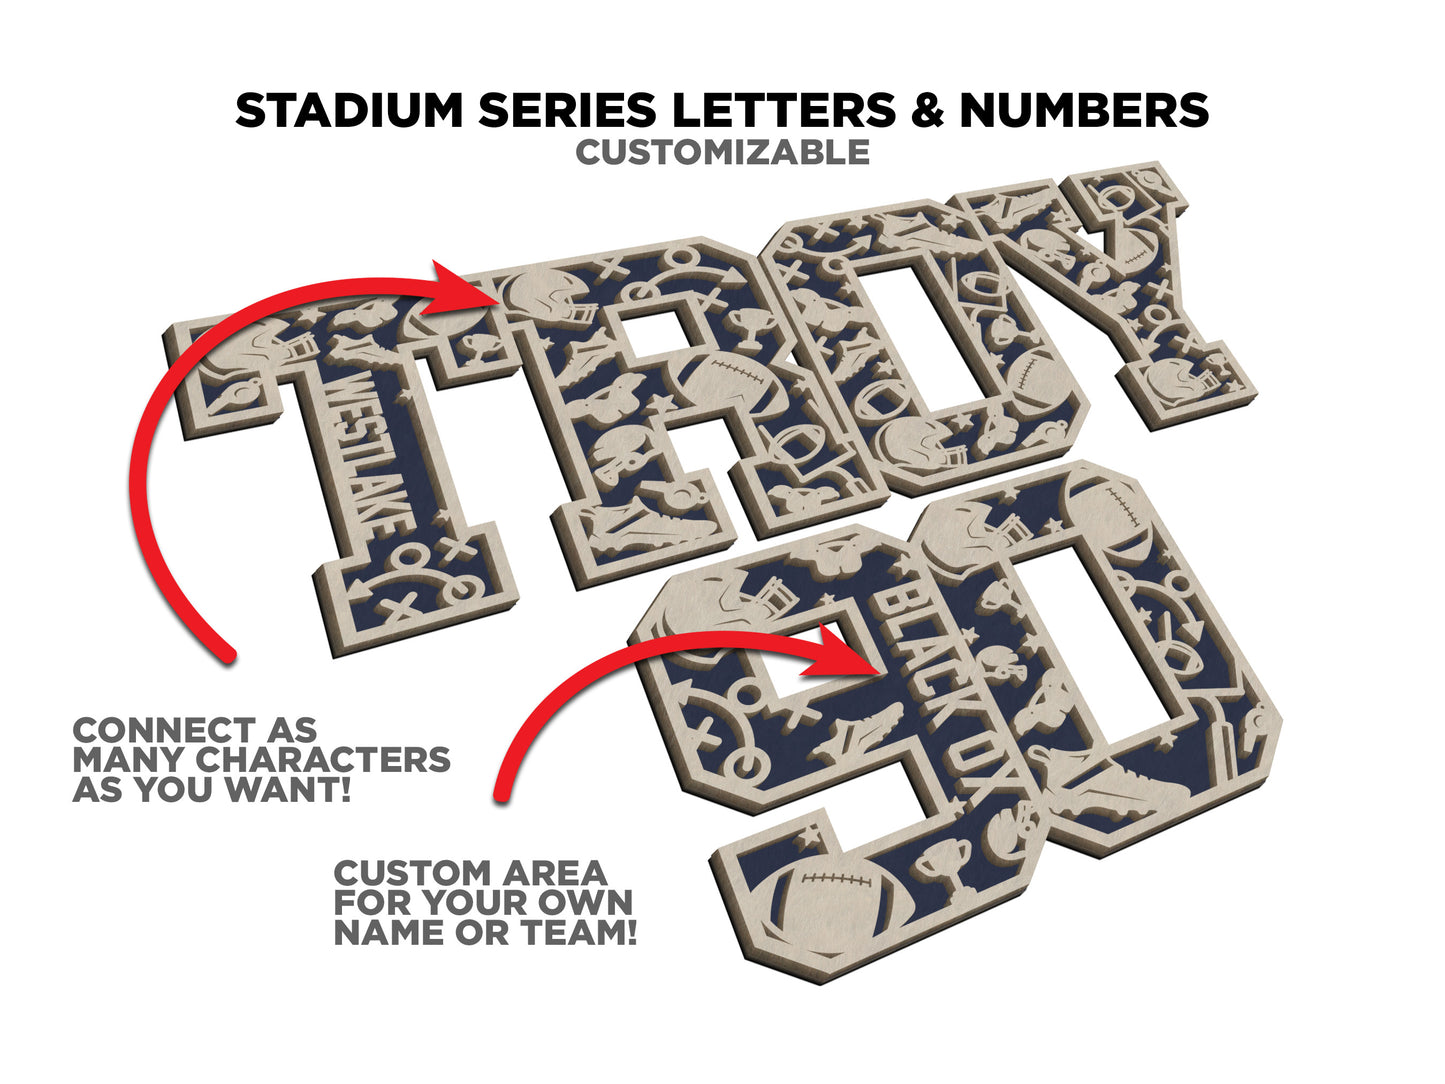 Stadium Series Letters and Numbers - Baseball - Customizable and Non Customizable options included - Tested on Glowforge & Lightburn